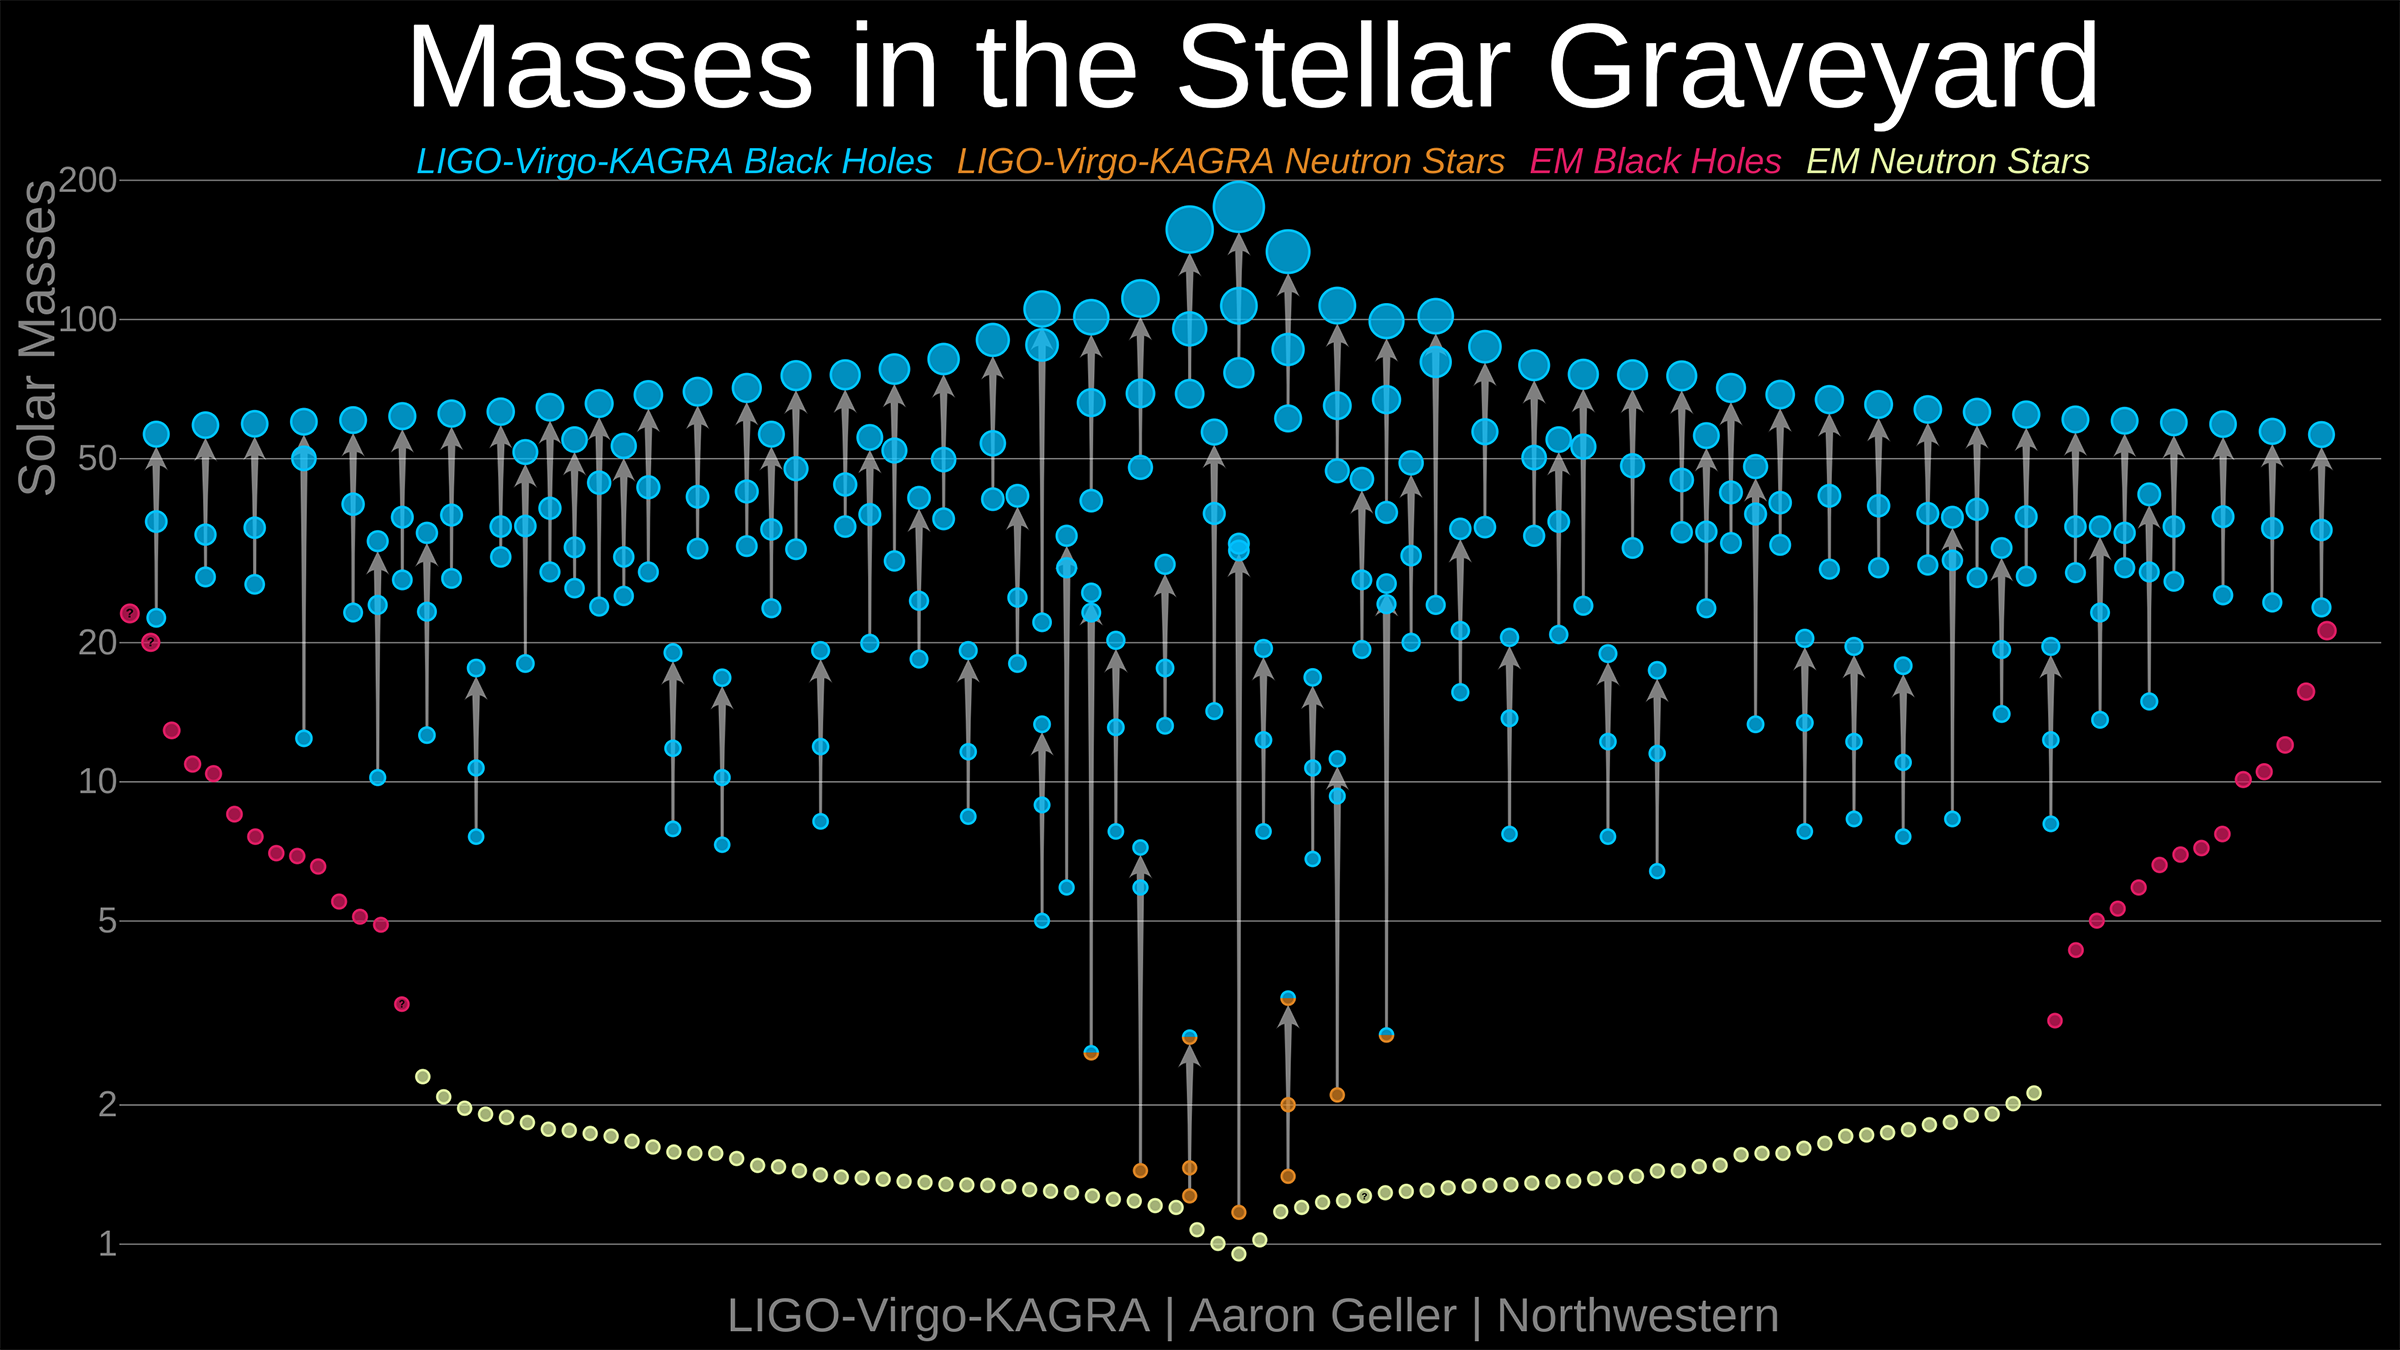 Chart showing masses of more than 100 black holes and neutron stars detected by gravitational waves